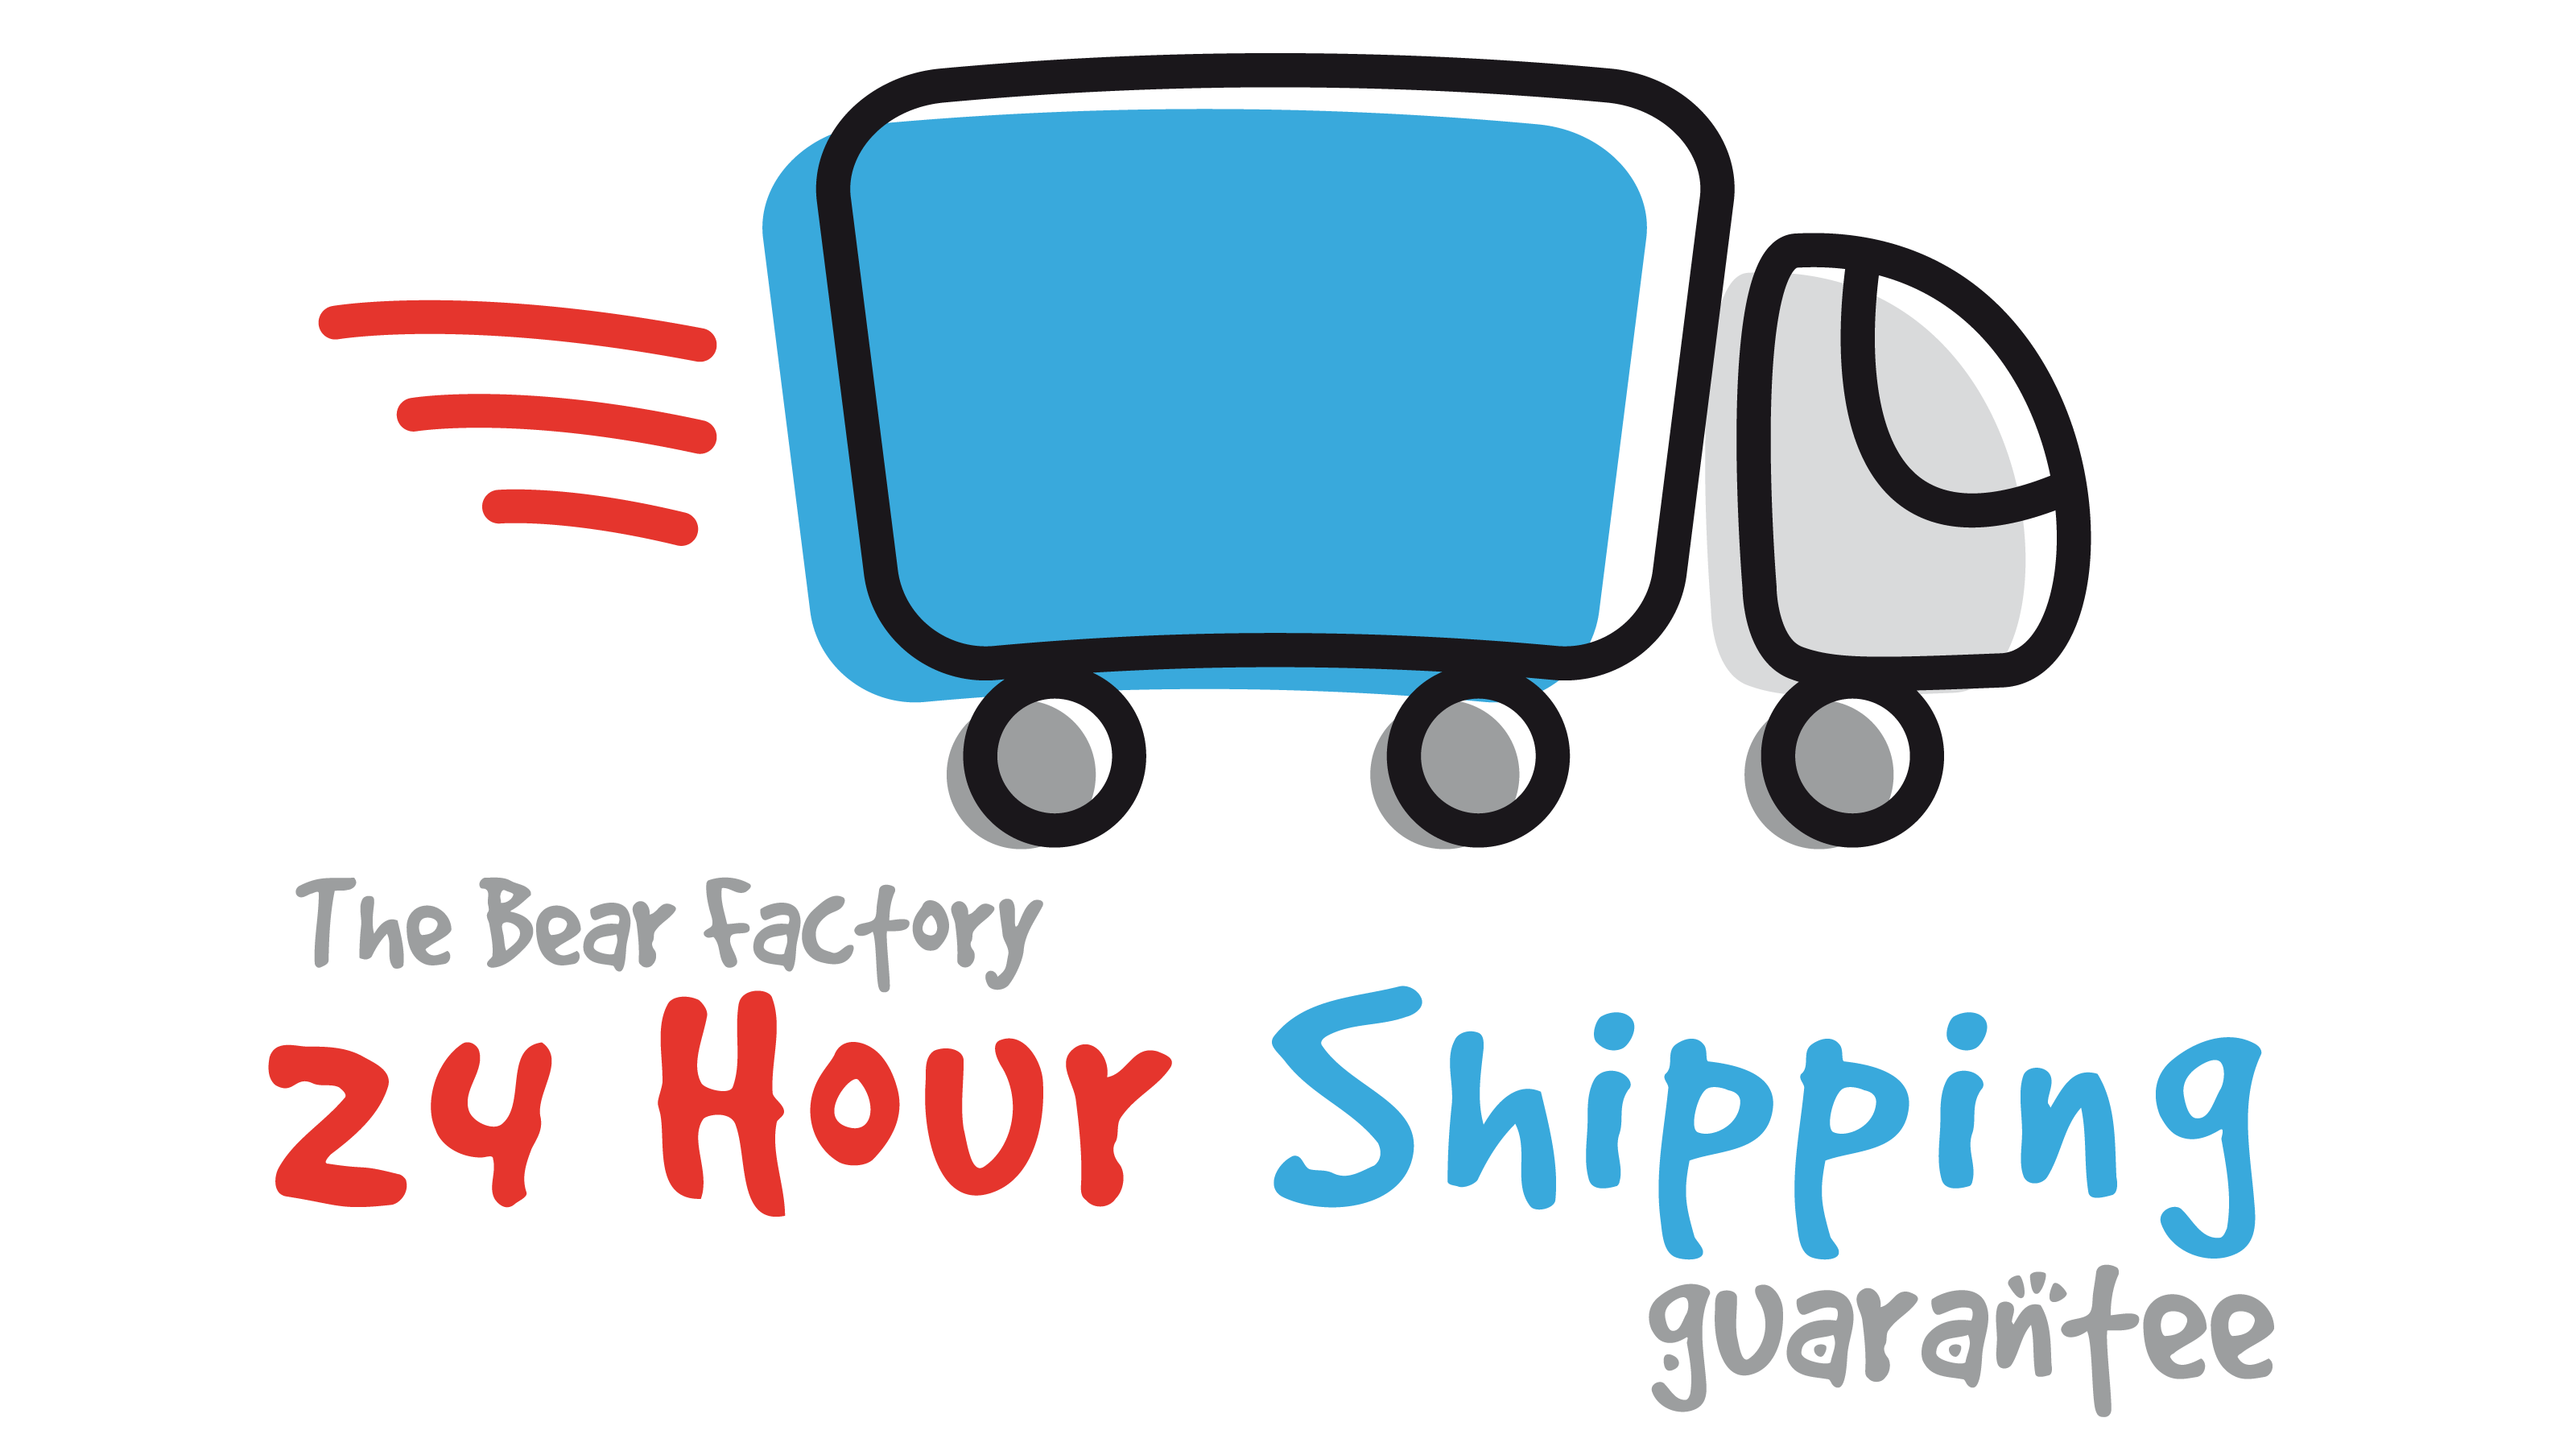 truck graphic with text that says "the bear factory 24 hours shipping guarantee" for start page